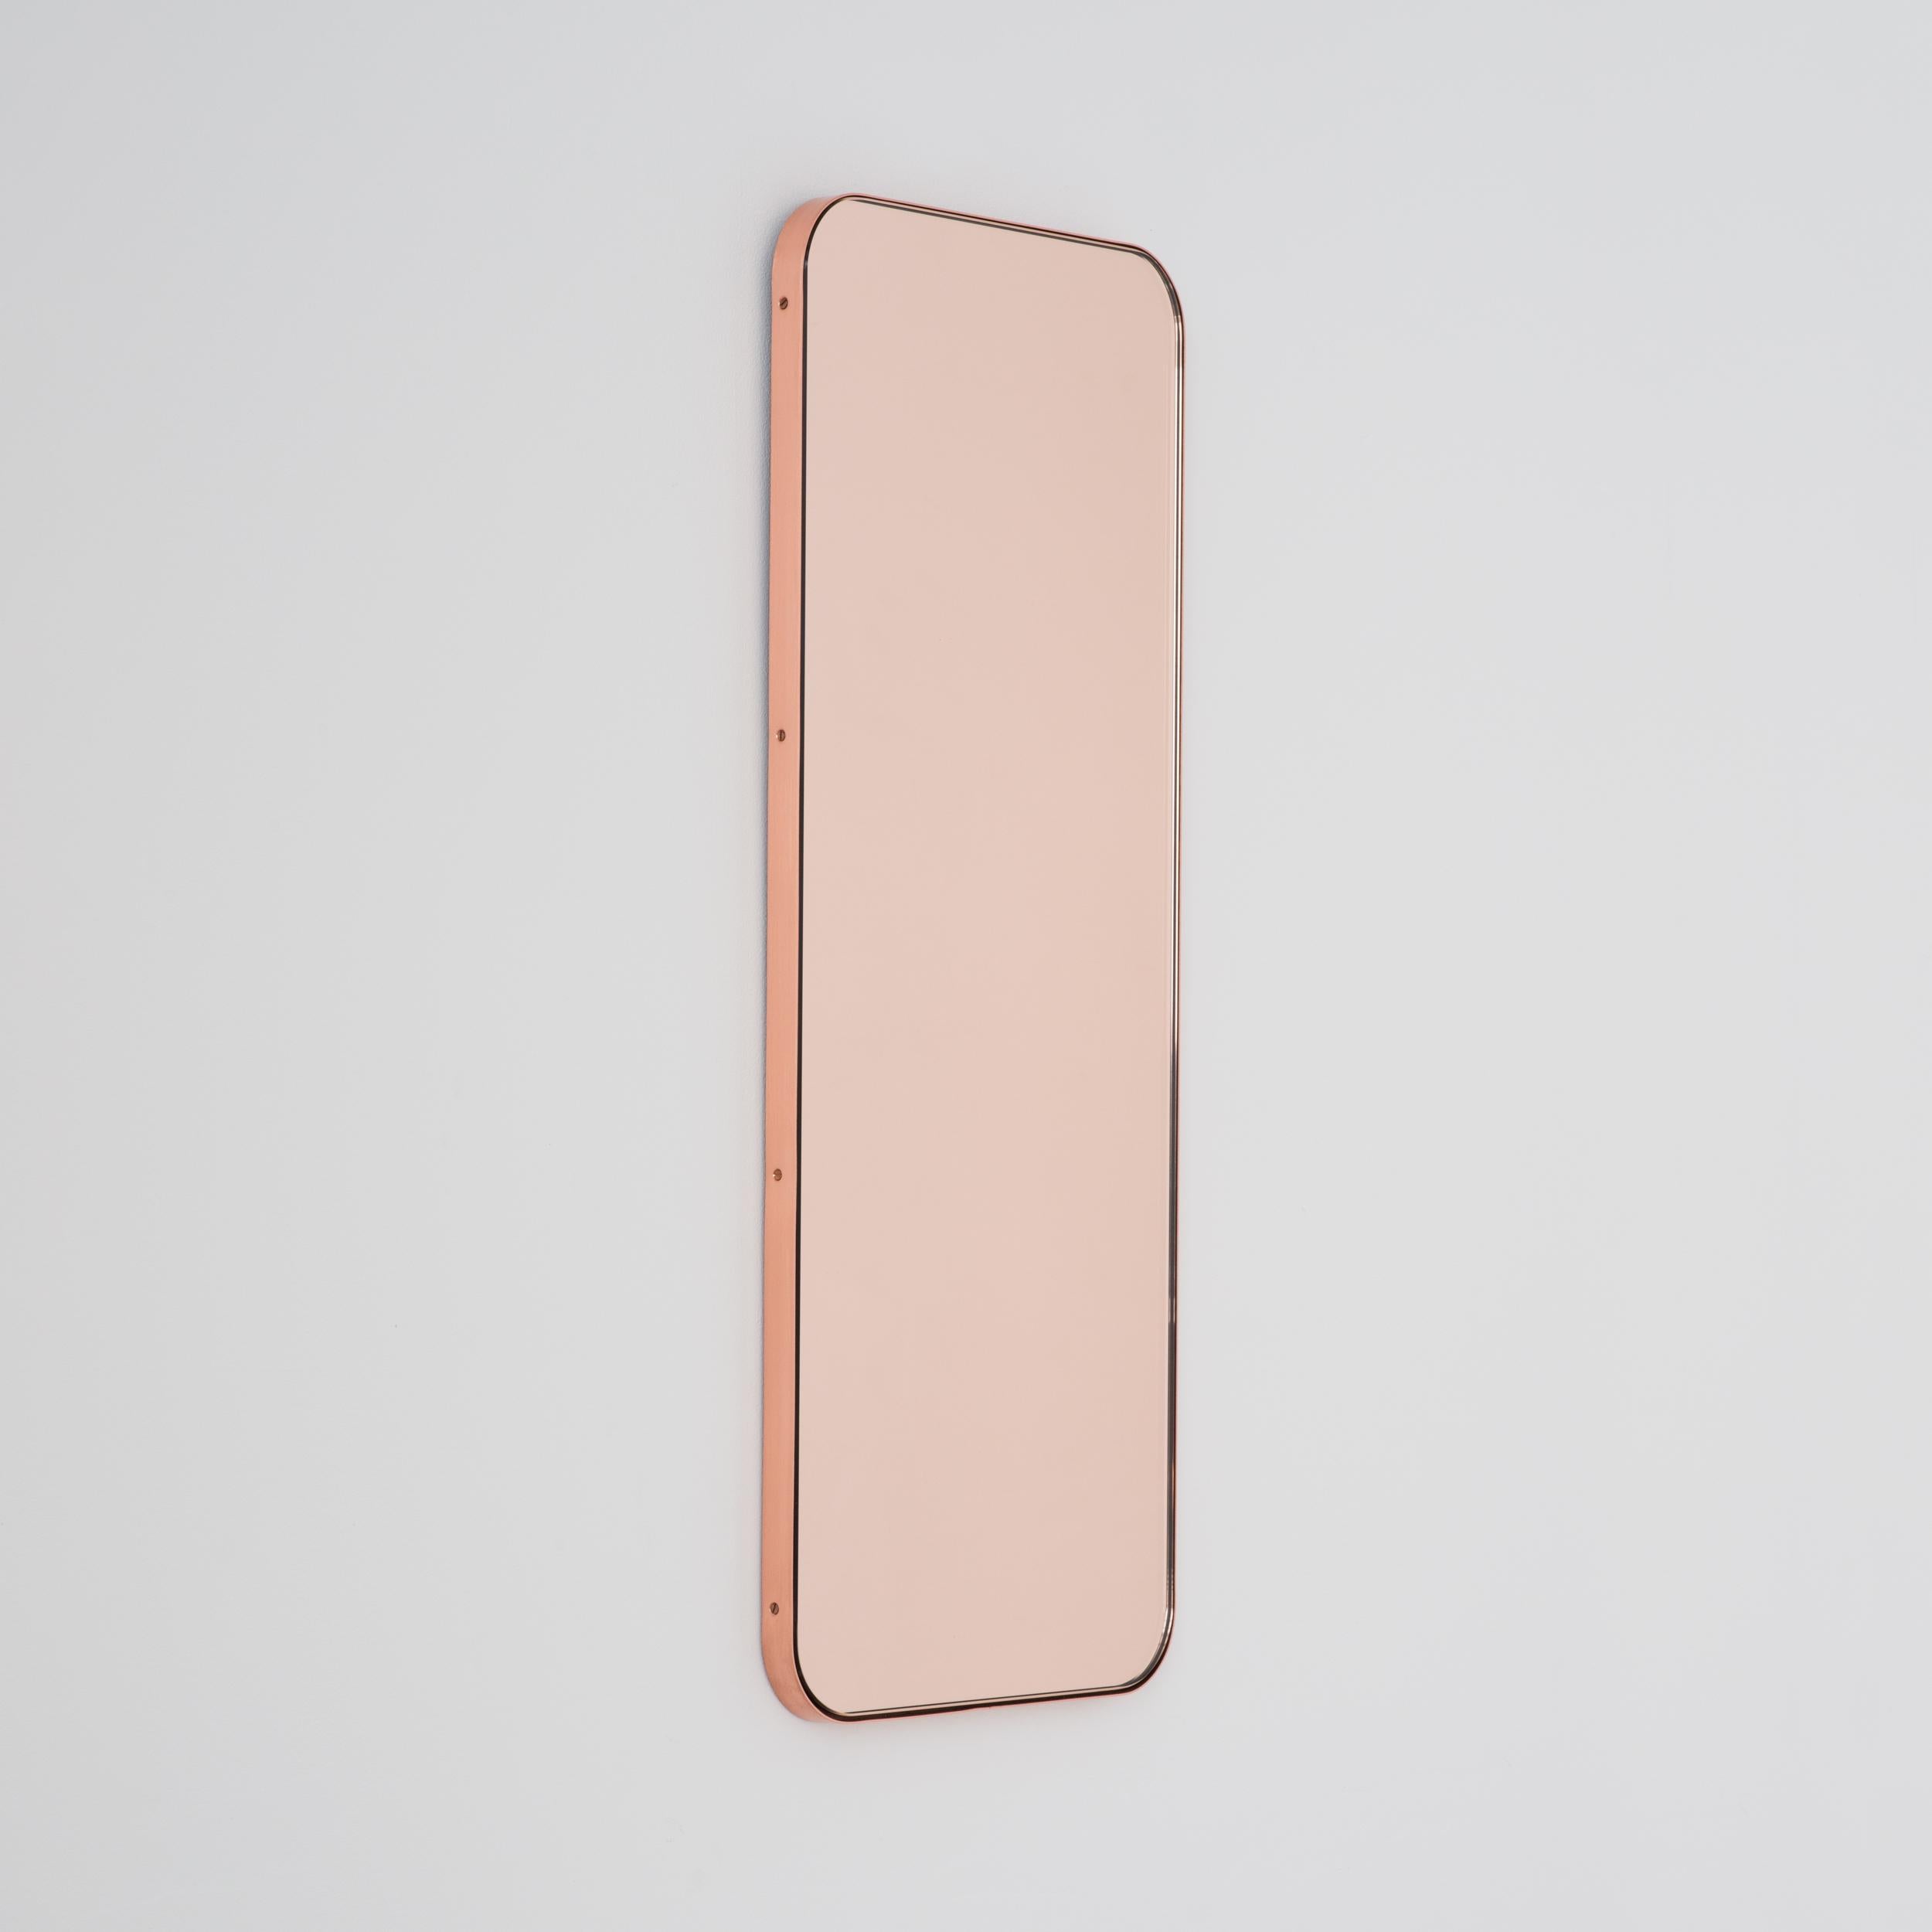 Quadris Rectangular Rose Gold Contemporary Mirror with a Copper Frame, Small For Sale 5